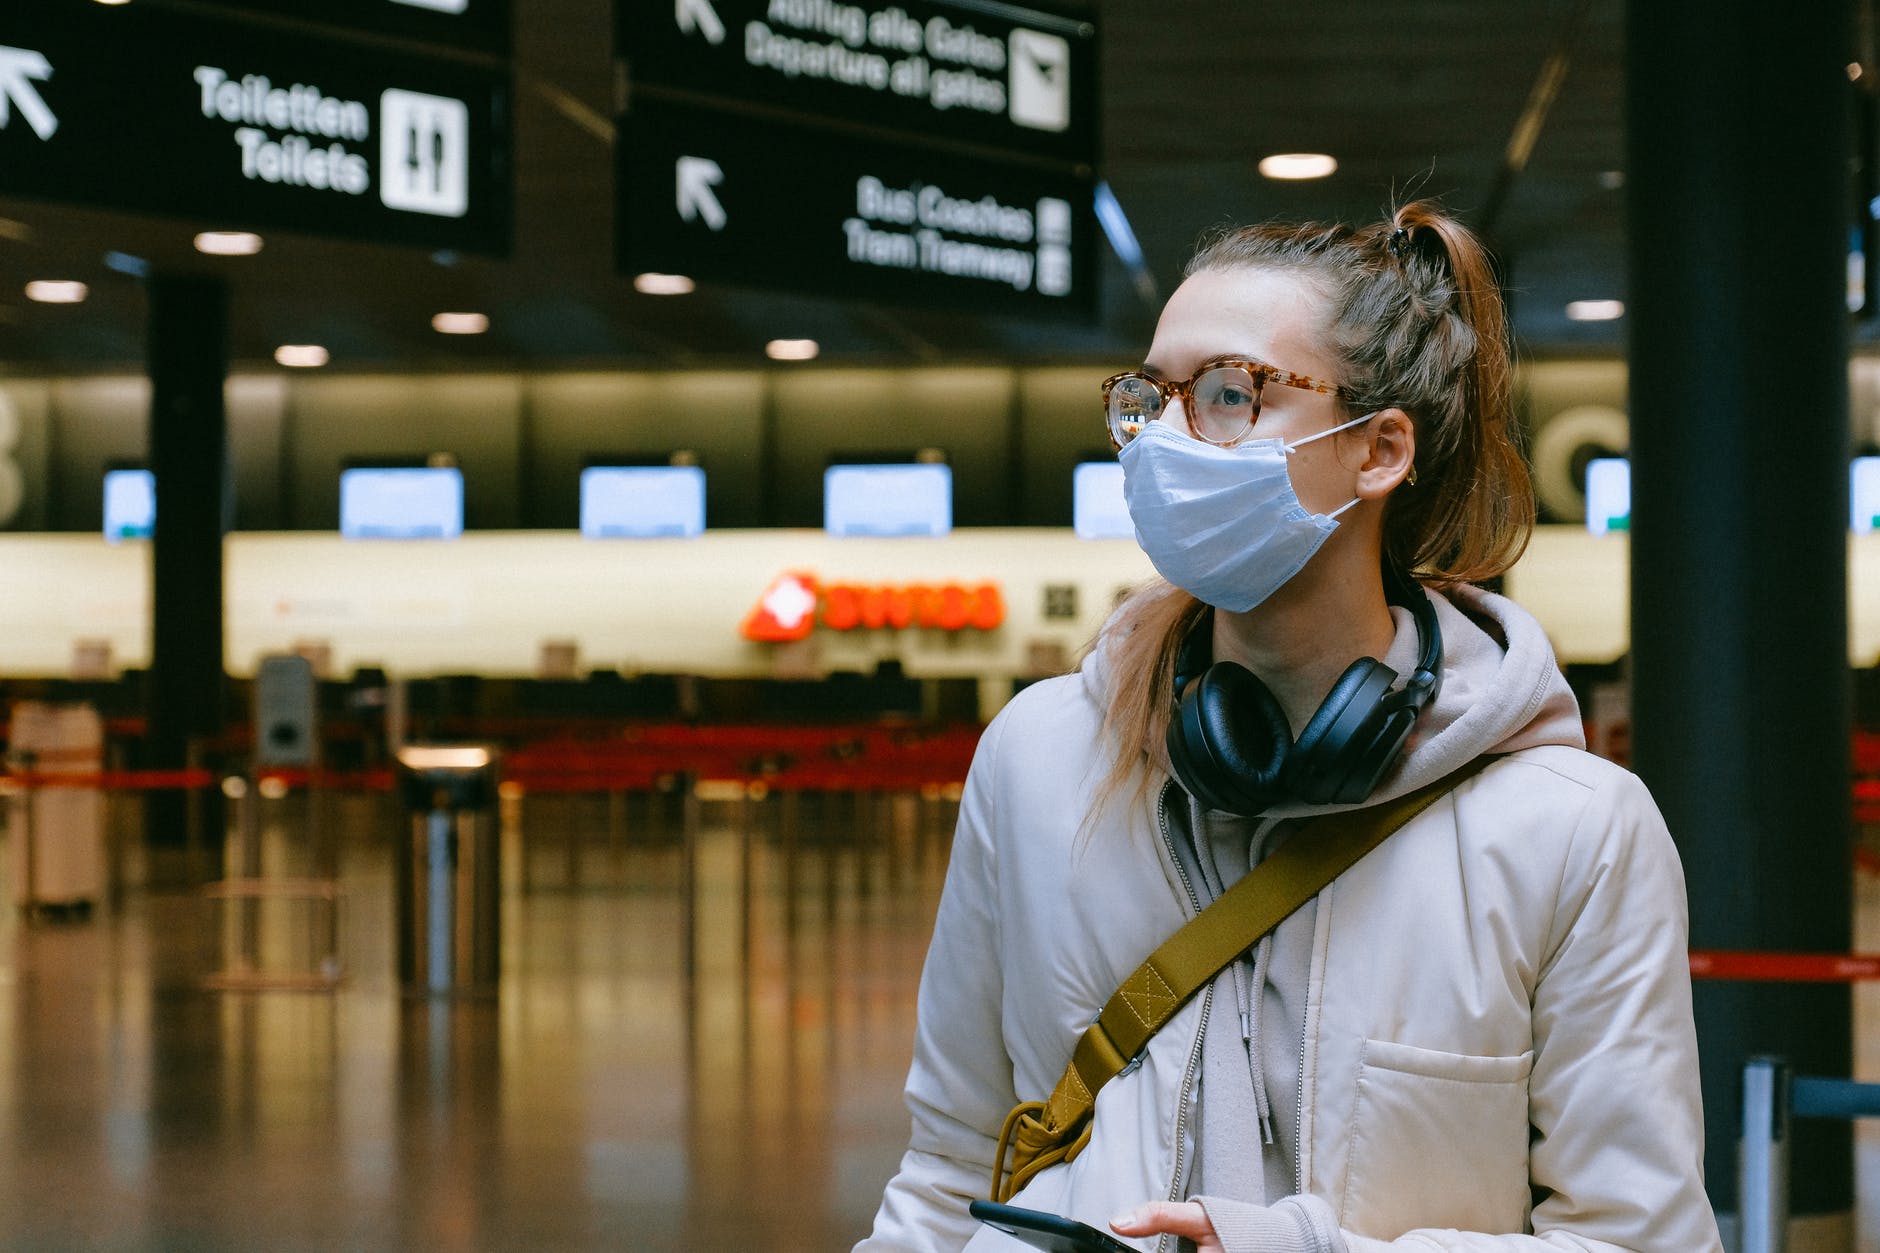 Airlines have implemented mask-wearing mandates for all passengers on board  © |  Anna Shvets/Pexels